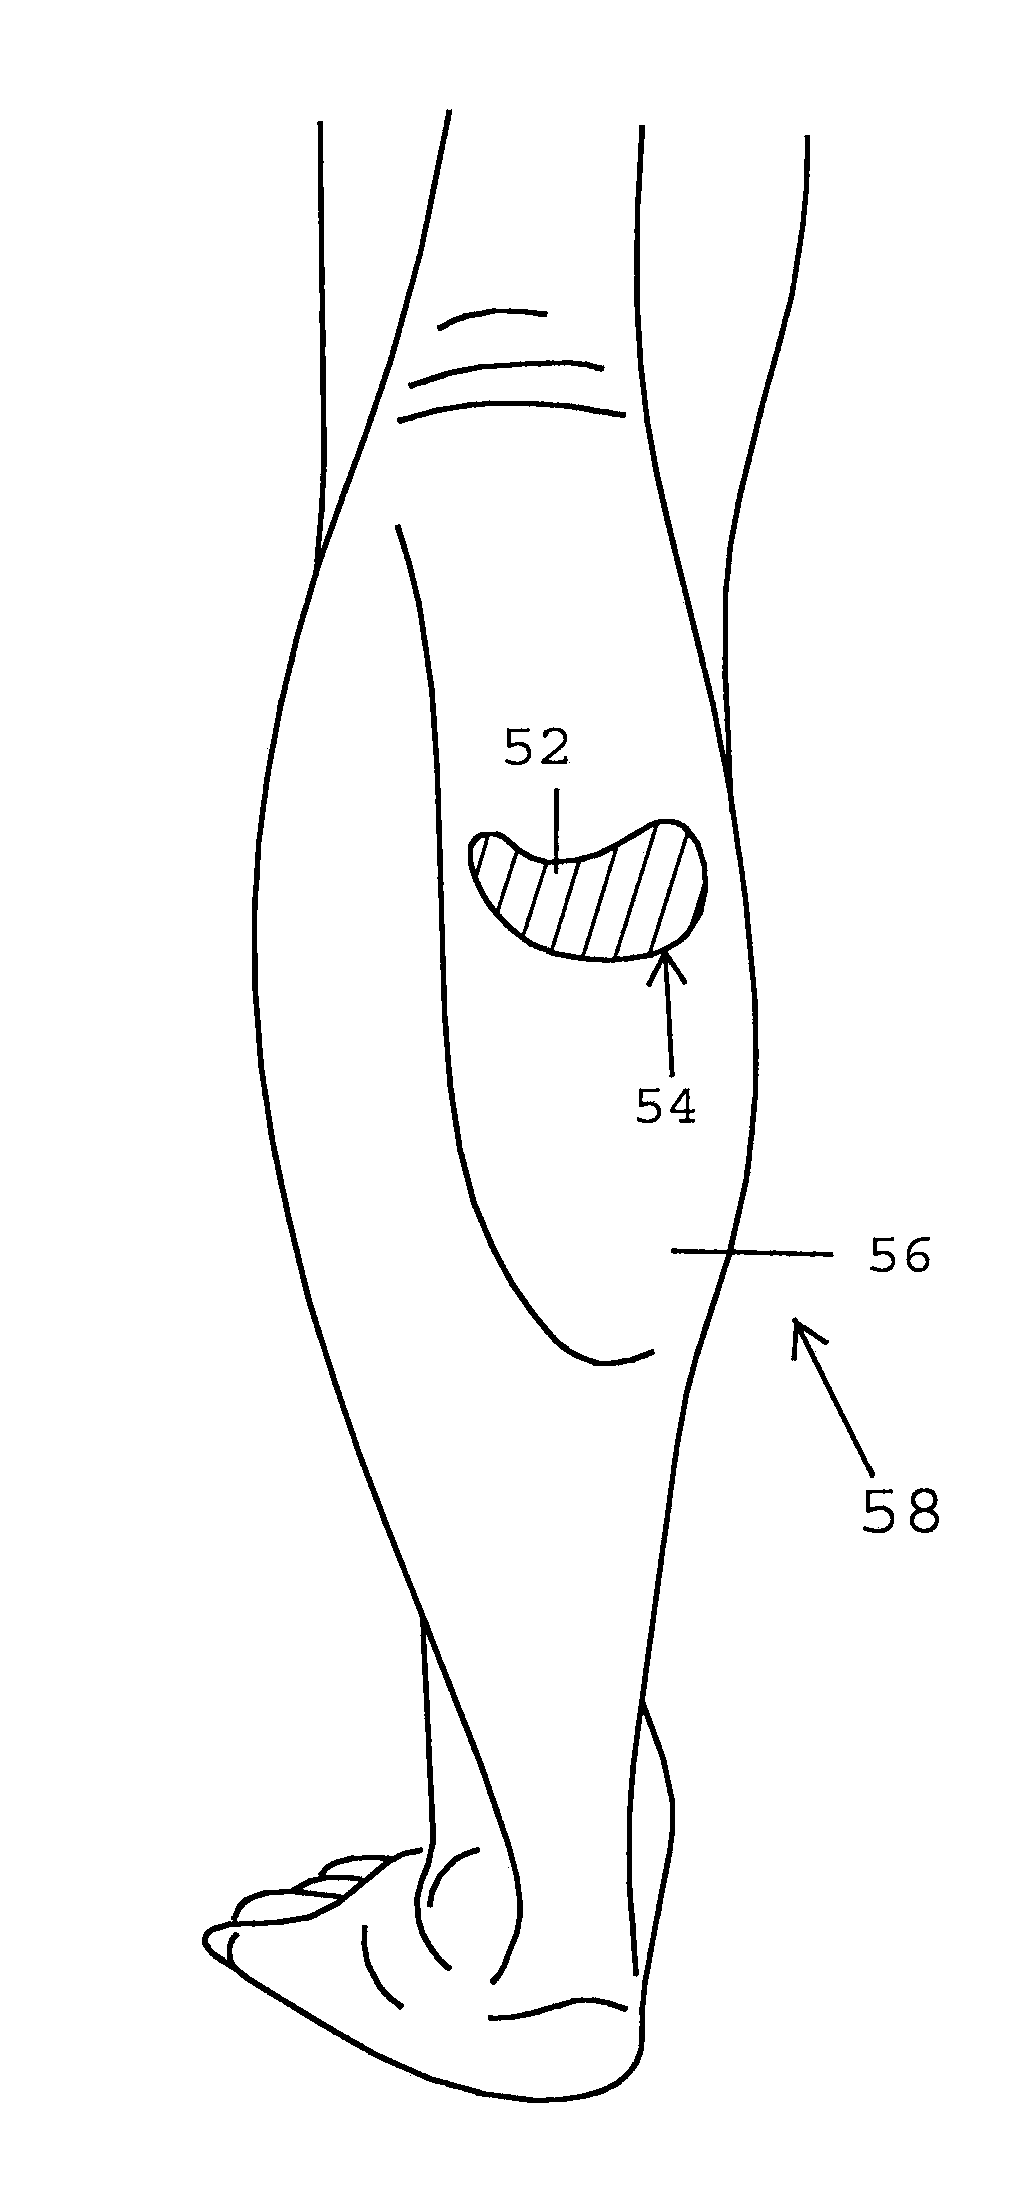 Devices and methods for manipulating circulation in the circulatory system of a patient